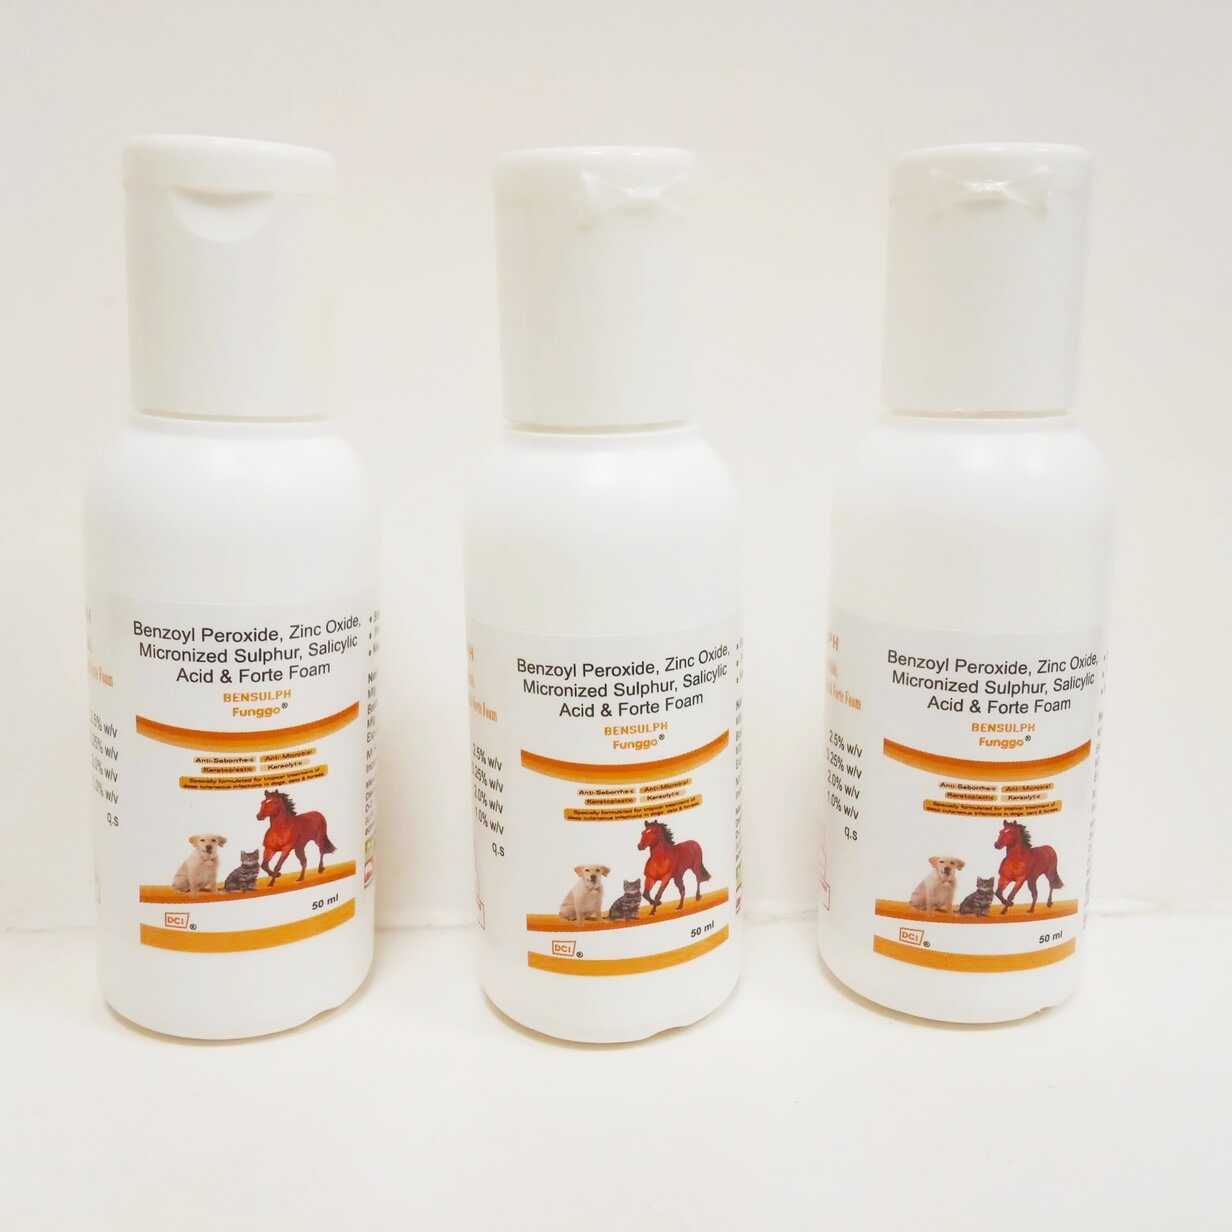 Bensulph Shampoo for Healthy Skin Regrowth (Pack of 3), each 50 ml for Dog,  Cat and Horse - Disinfecto Chemical Industries Pvt. Ltd.